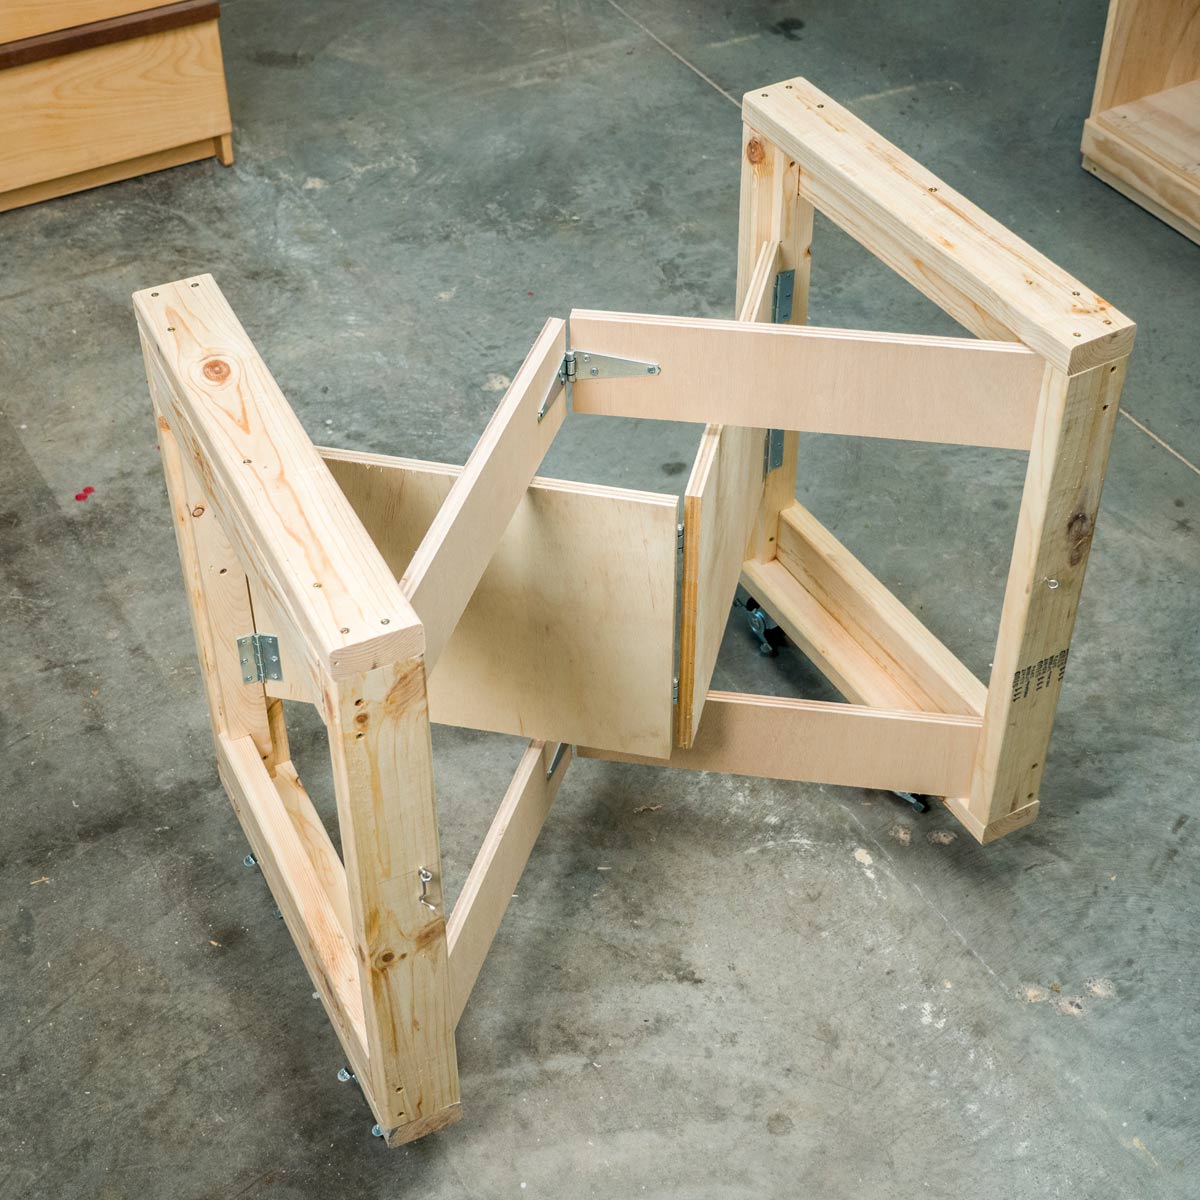 How to Make a Folding Workbench?